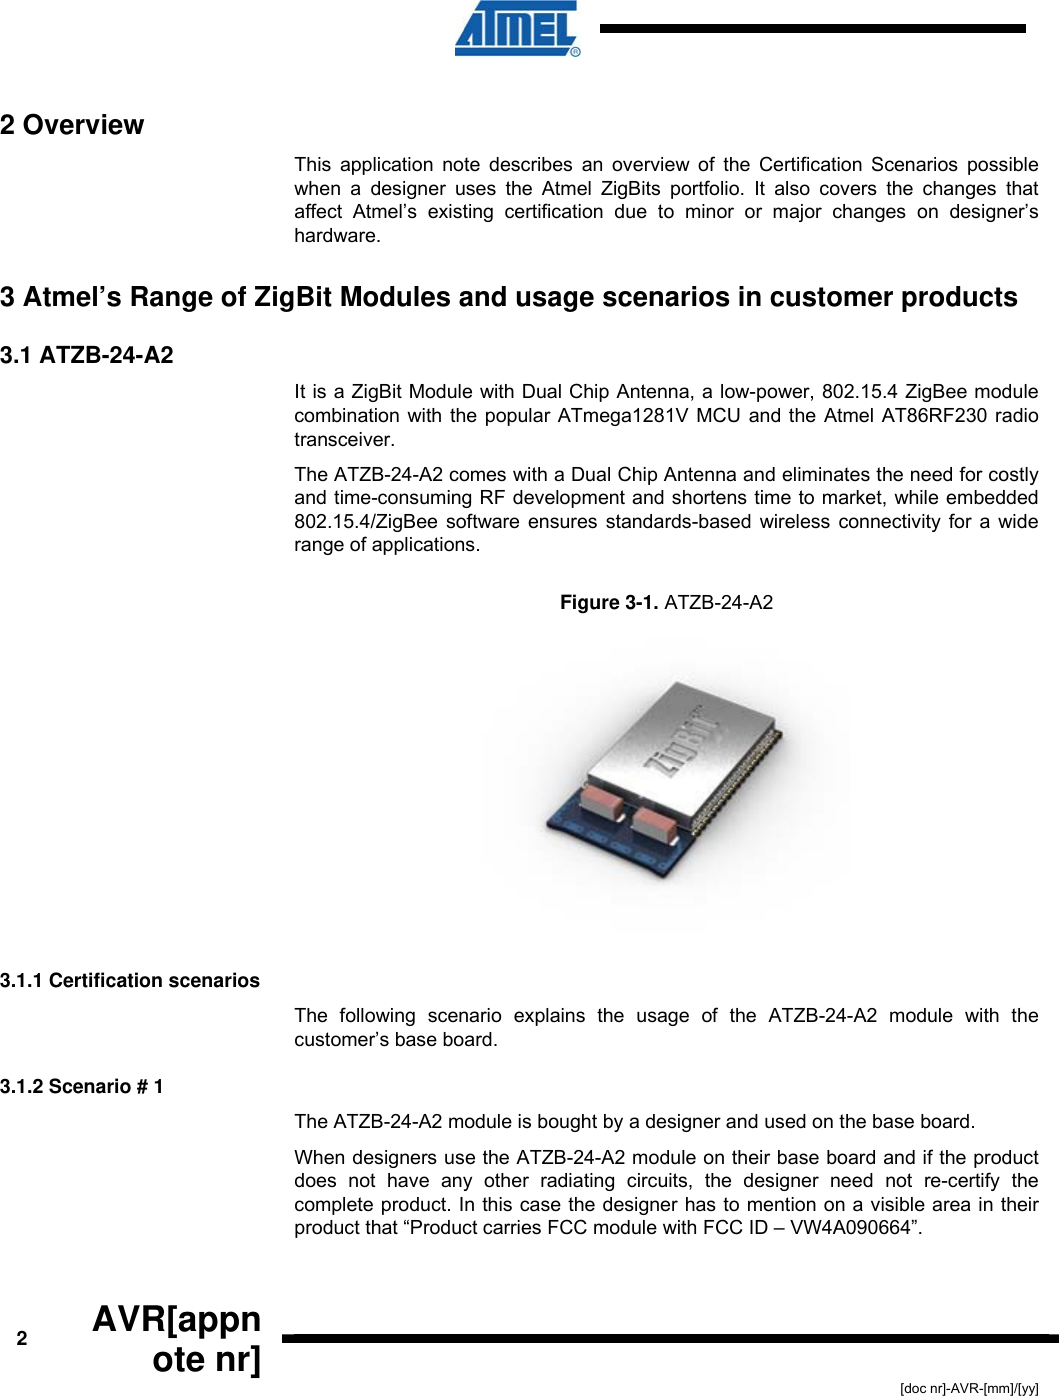  2  AVR[appnote nr] [doc nr]-AVR-[mm]/[yy] 2 Overview This application note describes an overview of the Certification Scenarios possible when a designer uses the Atmel ZigBits portfolio. It also covers the changes that affect Atmel’s existing certification due to minor or major changes on designer’s hardware. 3 Atmel’s Range of ZigBit Modules and usage scenarios in customer products  3.1 ATZB-24-A2 It is a ZigBit Module with Dual Chip Antenna, a low-power, 802.15.4 ZigBee module combination with the popular ATmega1281V MCU and the Atmel AT86RF230 radio transceiver.  The ATZB-24-A2 comes with a Dual Chip Antenna and eliminates the need for costly and time-consuming RF development and shortens time to market, while embedded 802.15.4/ZigBee software ensures standards-based wireless connectivity for a wide range of applications. Figure  3-1. ATZB-24-A2   3.1.1 Certification scenarios The following scenario explains the usage of the ATZB-24-A2 module with the customer’s base board. 3.1.2 Scenario # 1 The ATZB-24-A2 module is bought by a designer and used on the base board.   When designers use the ATZB-24-A2 module on their base board and if the product does not have any other radiating circuits, the designer need not re-certify the complete product. In this case the designer has to mention on a visible area in their product that “Product carries FCC module with FCC ID – VW4A090664”.  